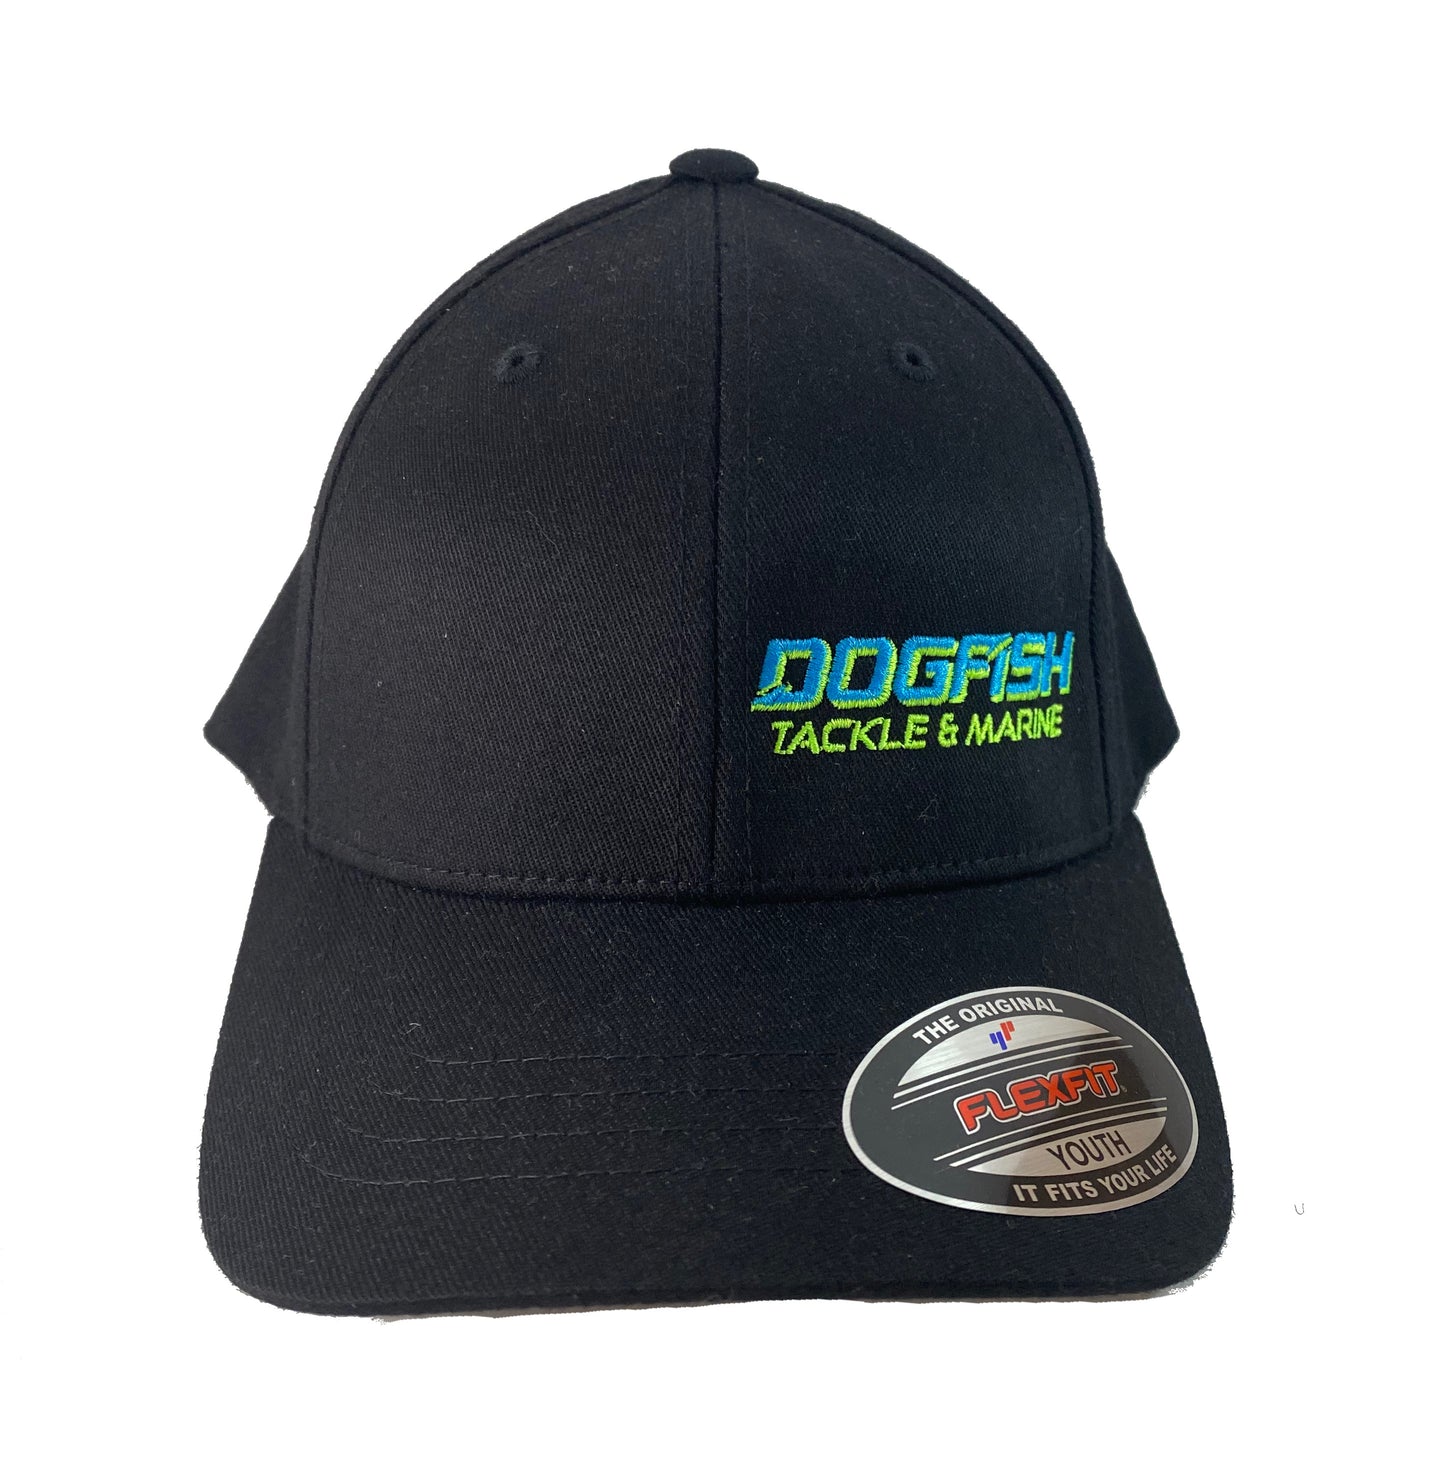 Dogfish Youth Fitted Hat - Dogfish Tackle & Marine